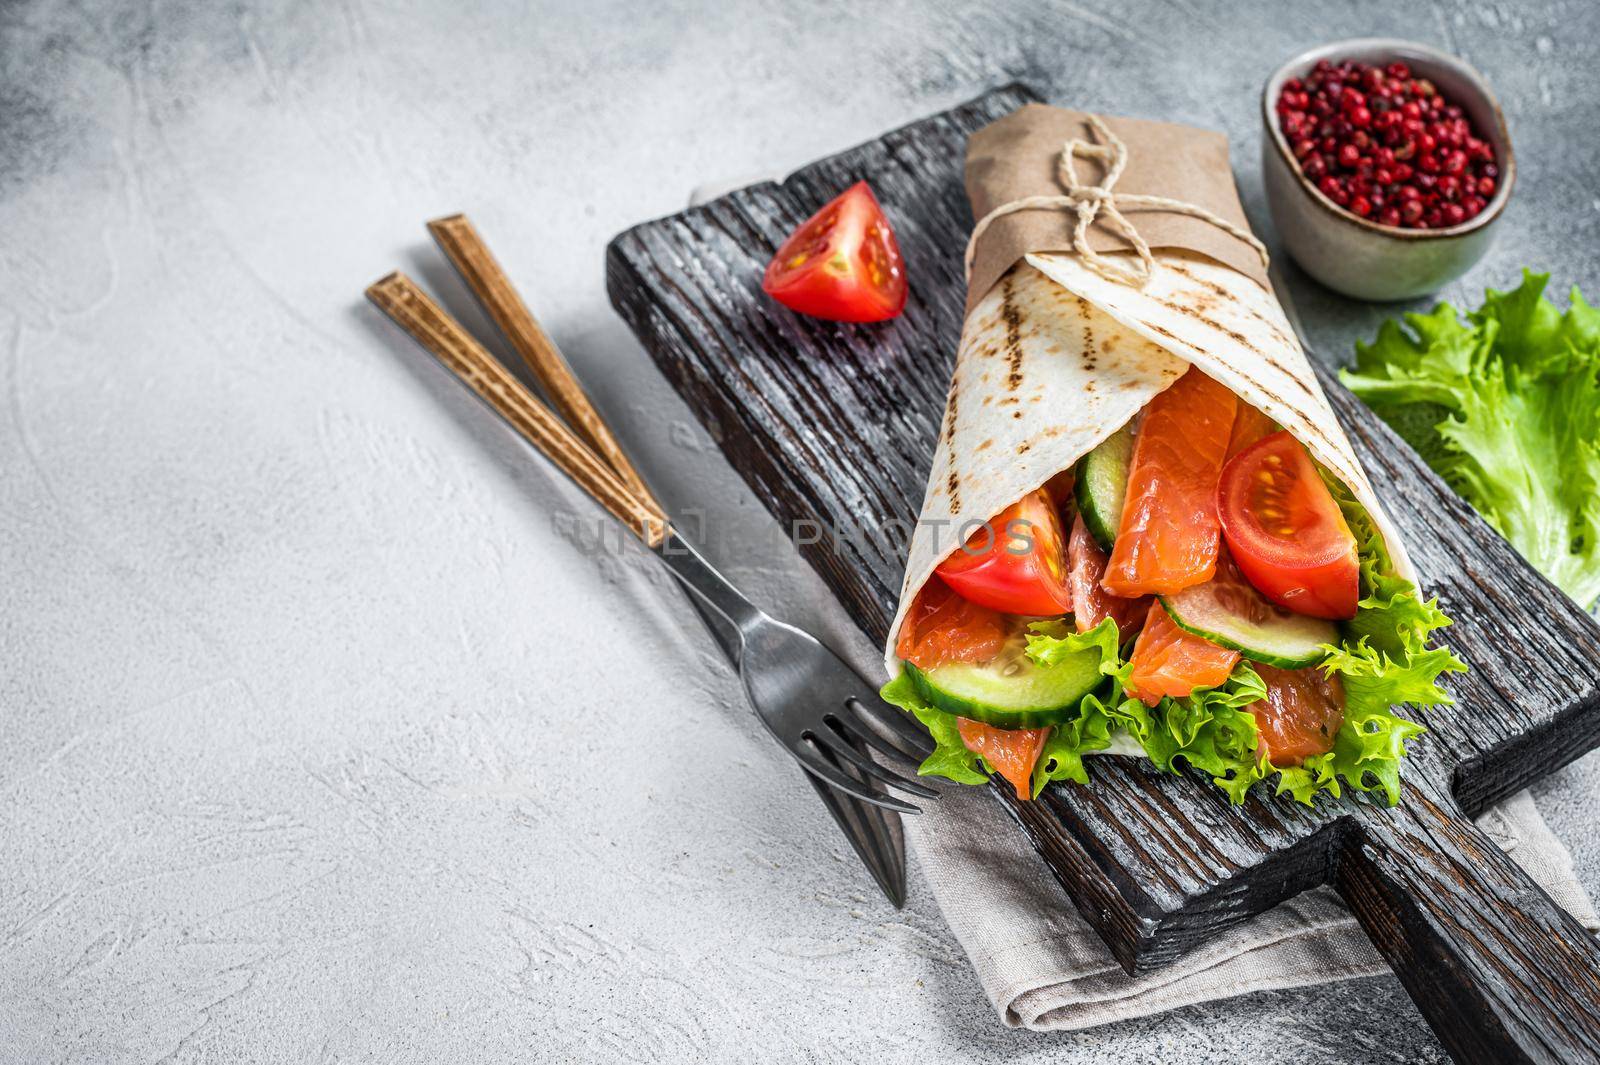 Wrap sandwich, roll with fish salmon and vegetables. White background. Top view. Copy space.